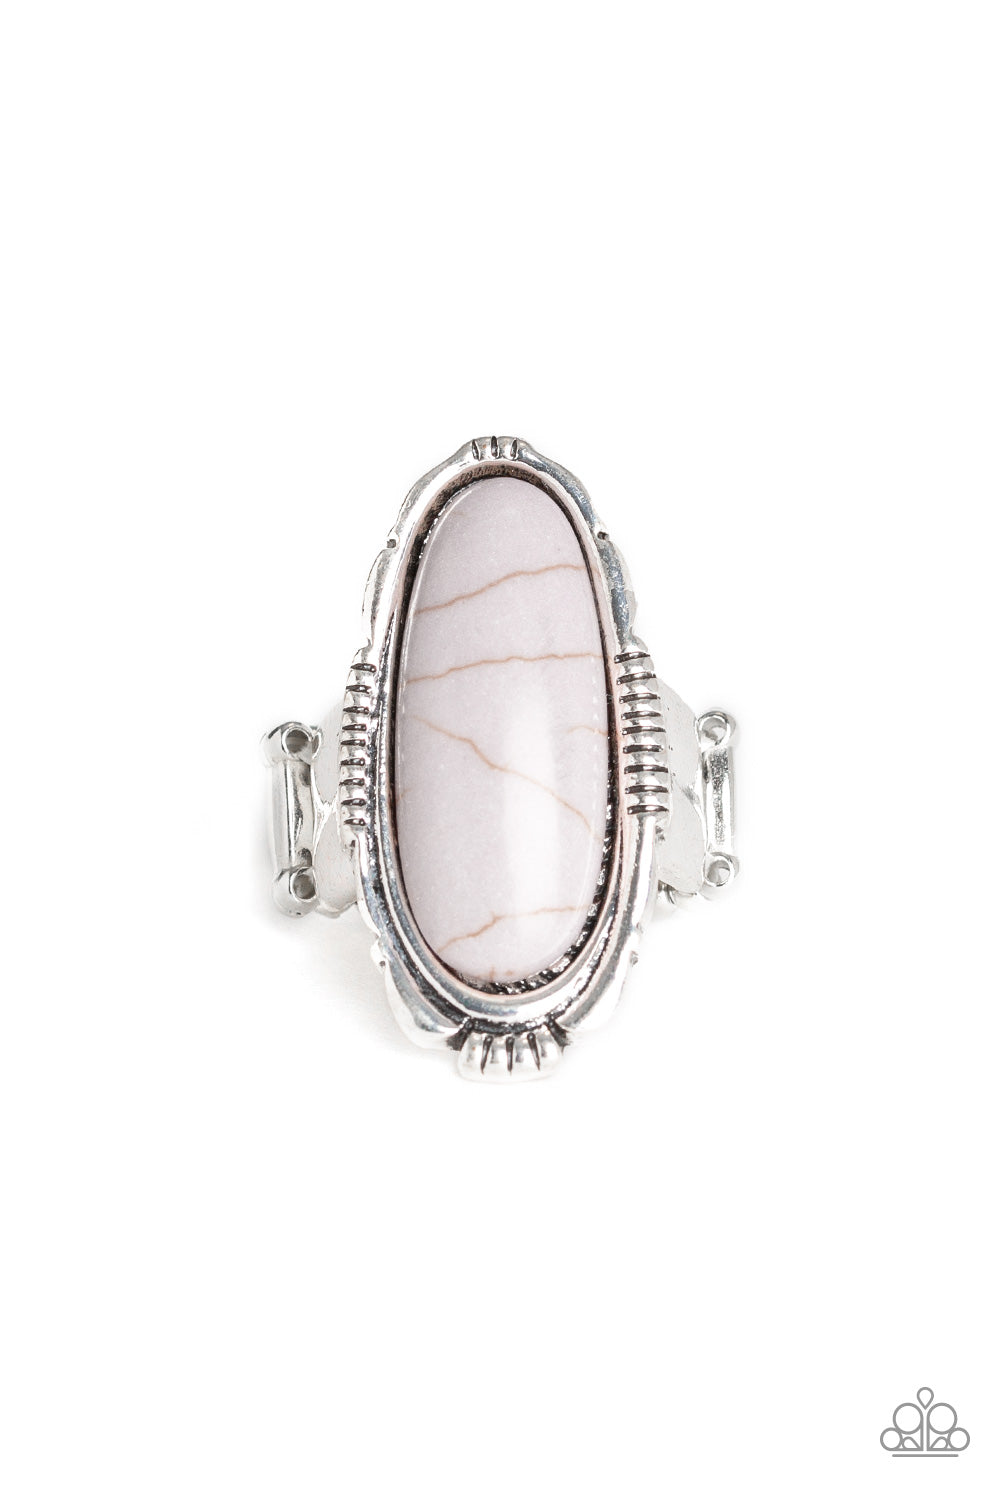 Paparazzi Accessories Desert Thirst - Silver Rings an oblong gray stone is pressed into the center of an ornate silver frame for a seasonal look. Features a stretchy band for a flexible fit.